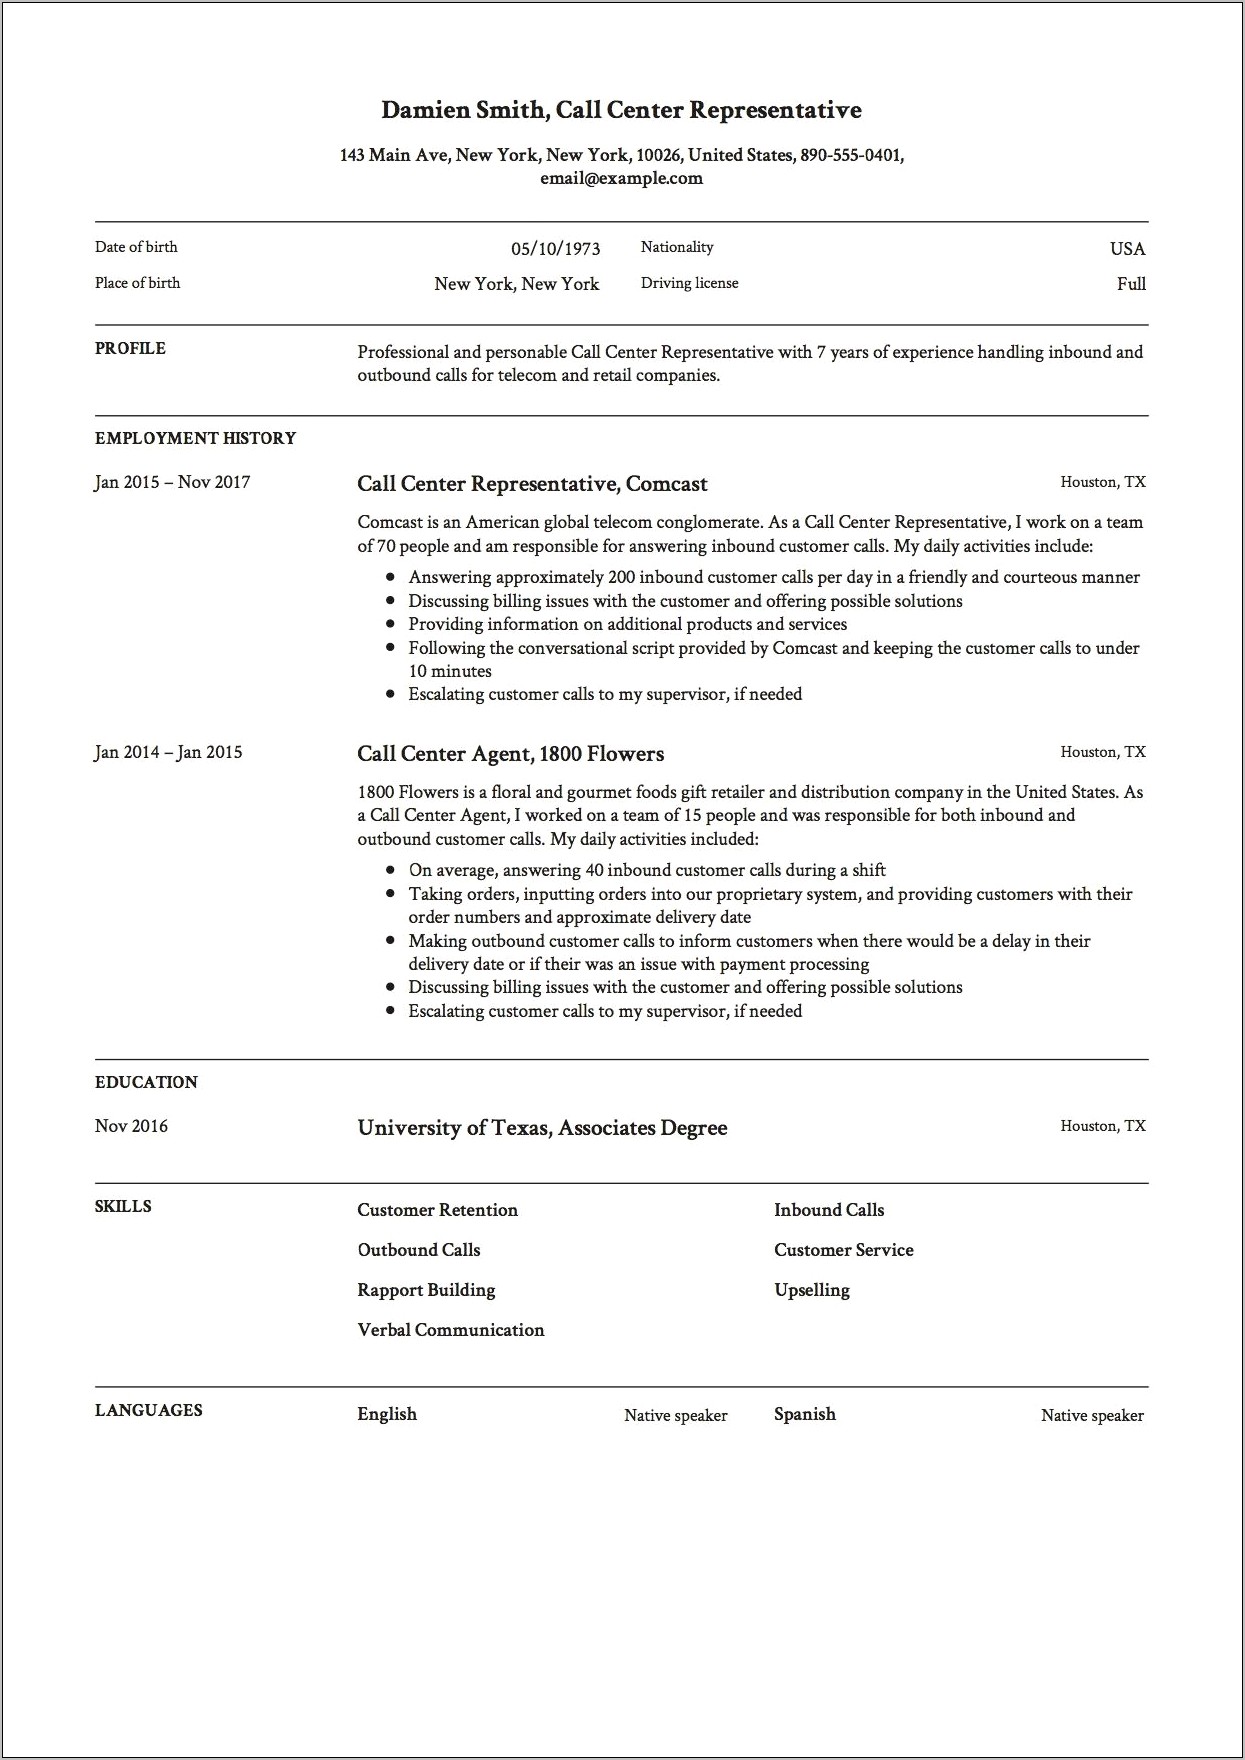 Resume Sample For First Time Job Seeker